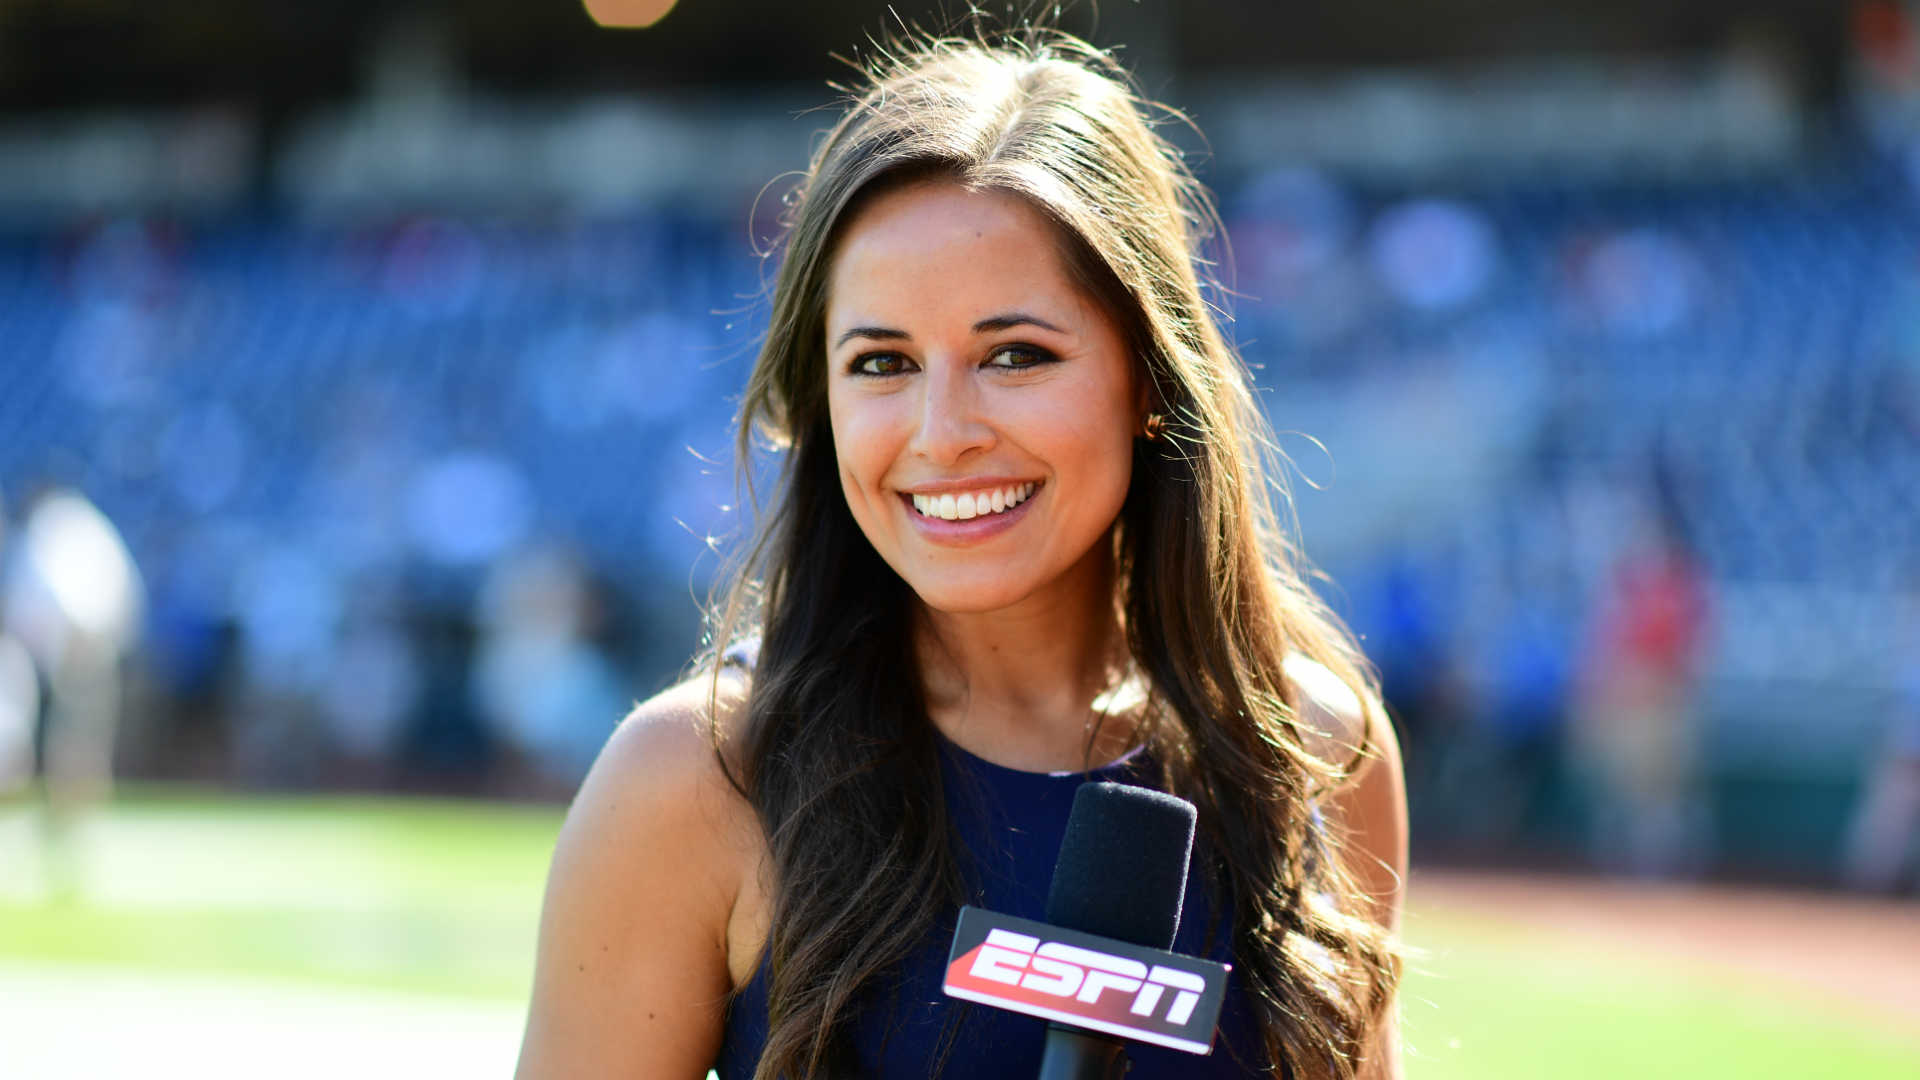 Kaylee Hartung has sort of a flat face too. 